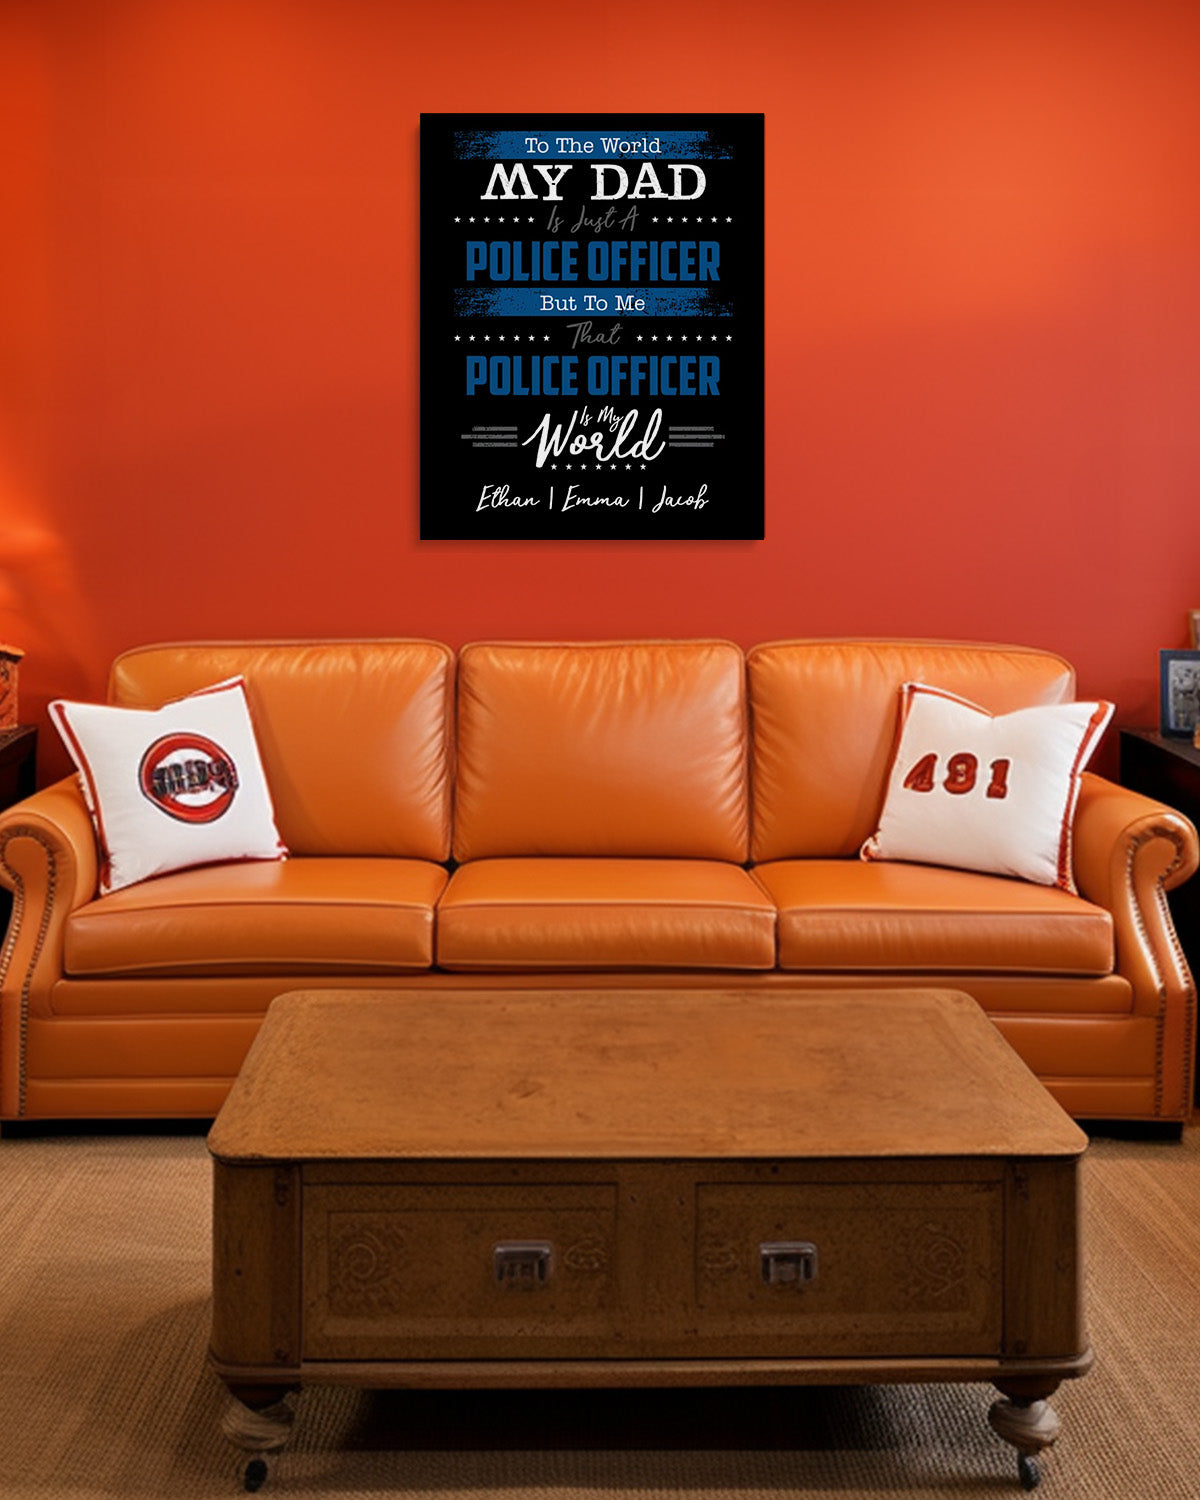 To The World My Dad Is Just A Police Officer | (YOUR NAMES) - Customizable Wall Decor Art Print on a black background canvas